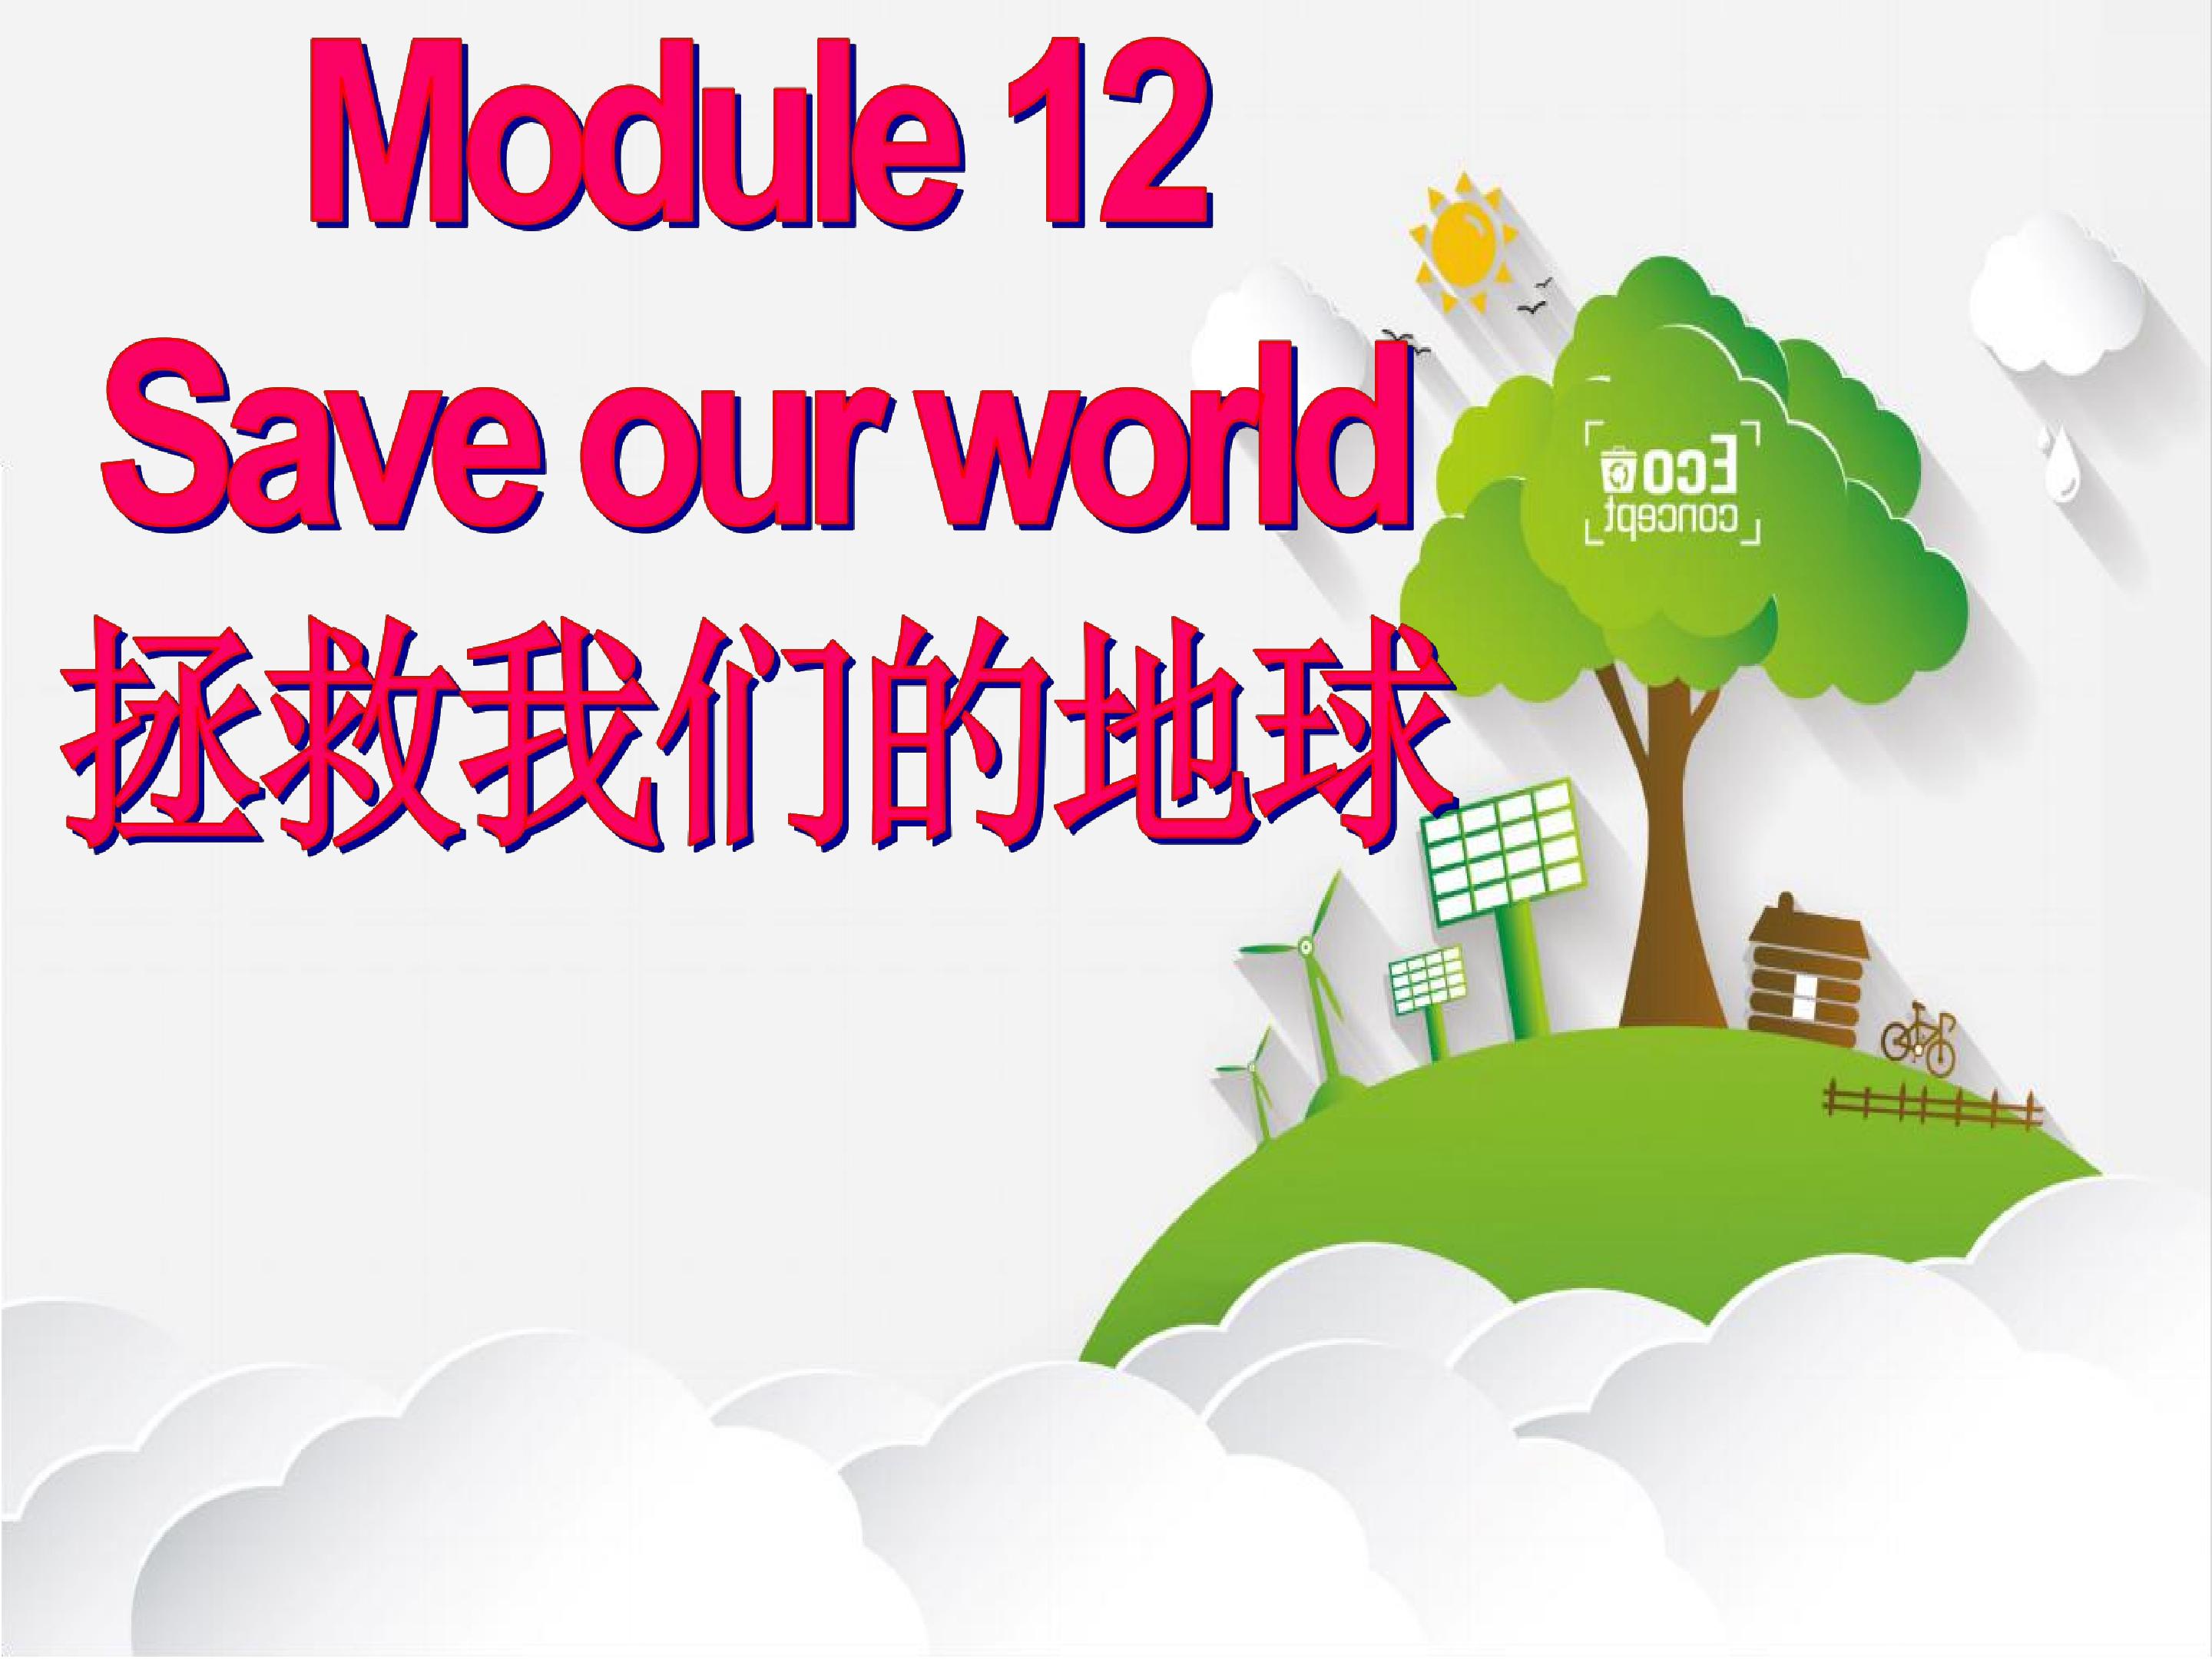 Module 12 Save our world